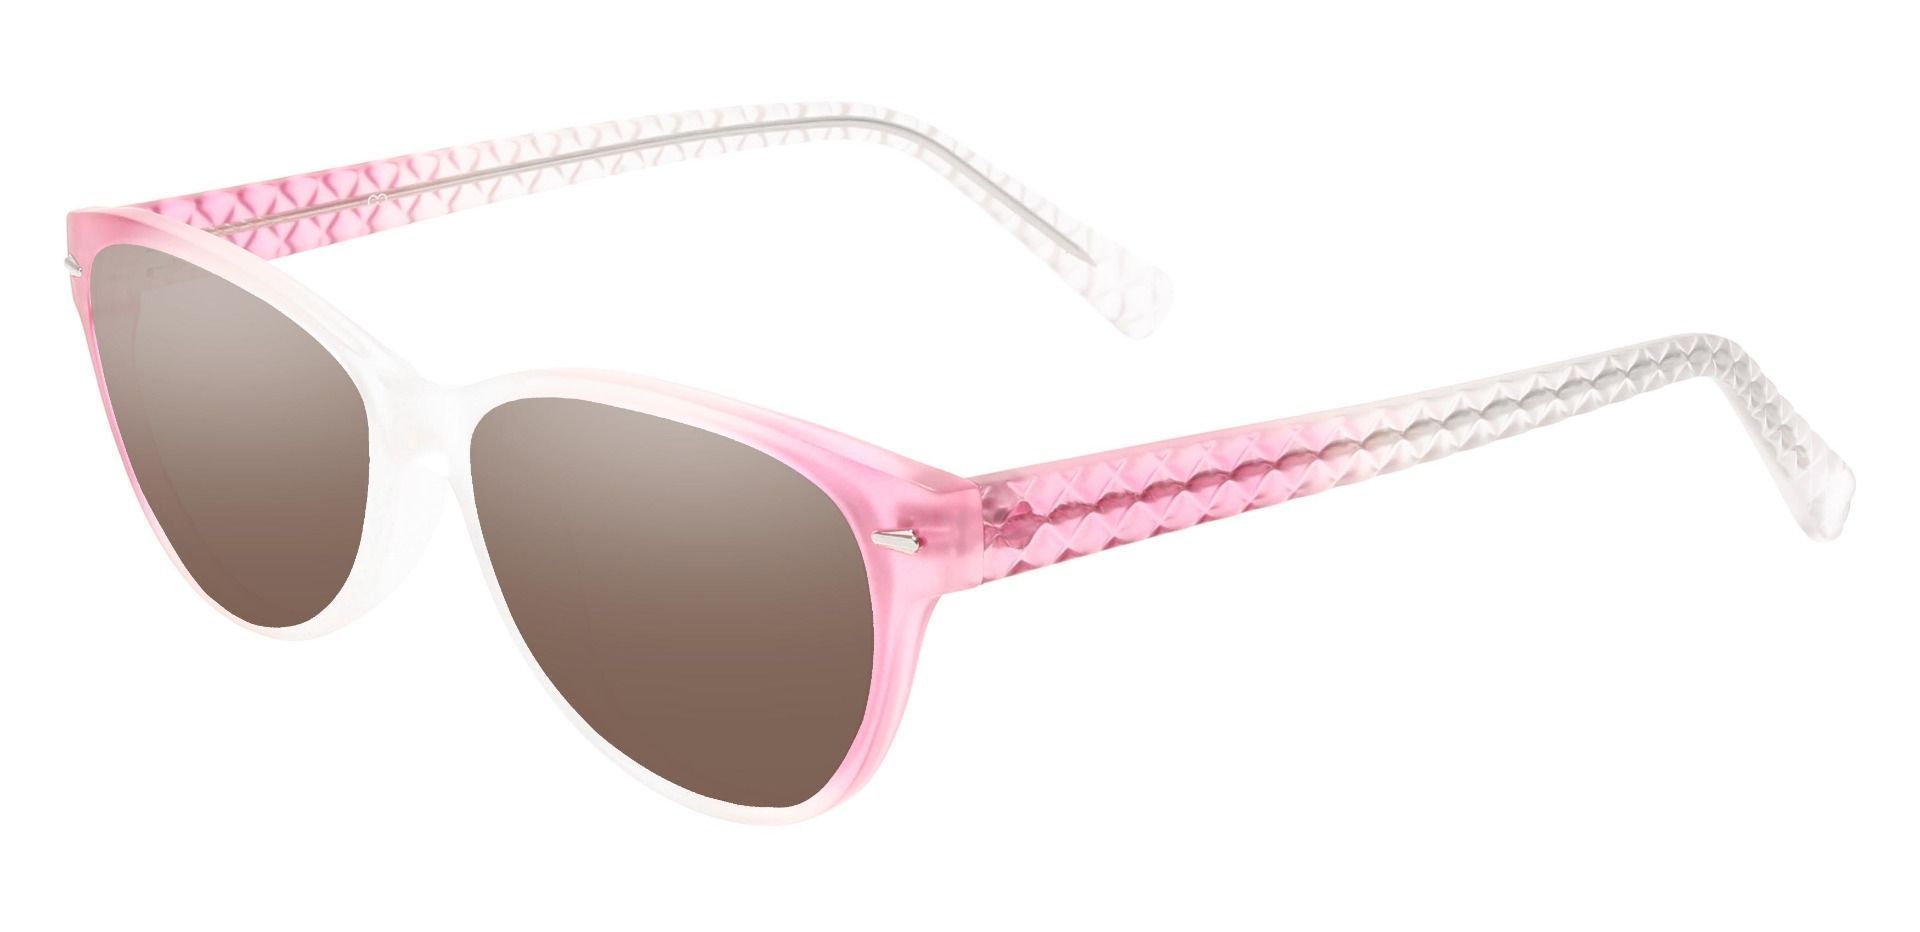 Olive Cat Eye Reading Sunglasses - Pink Frame With Brown Lenses